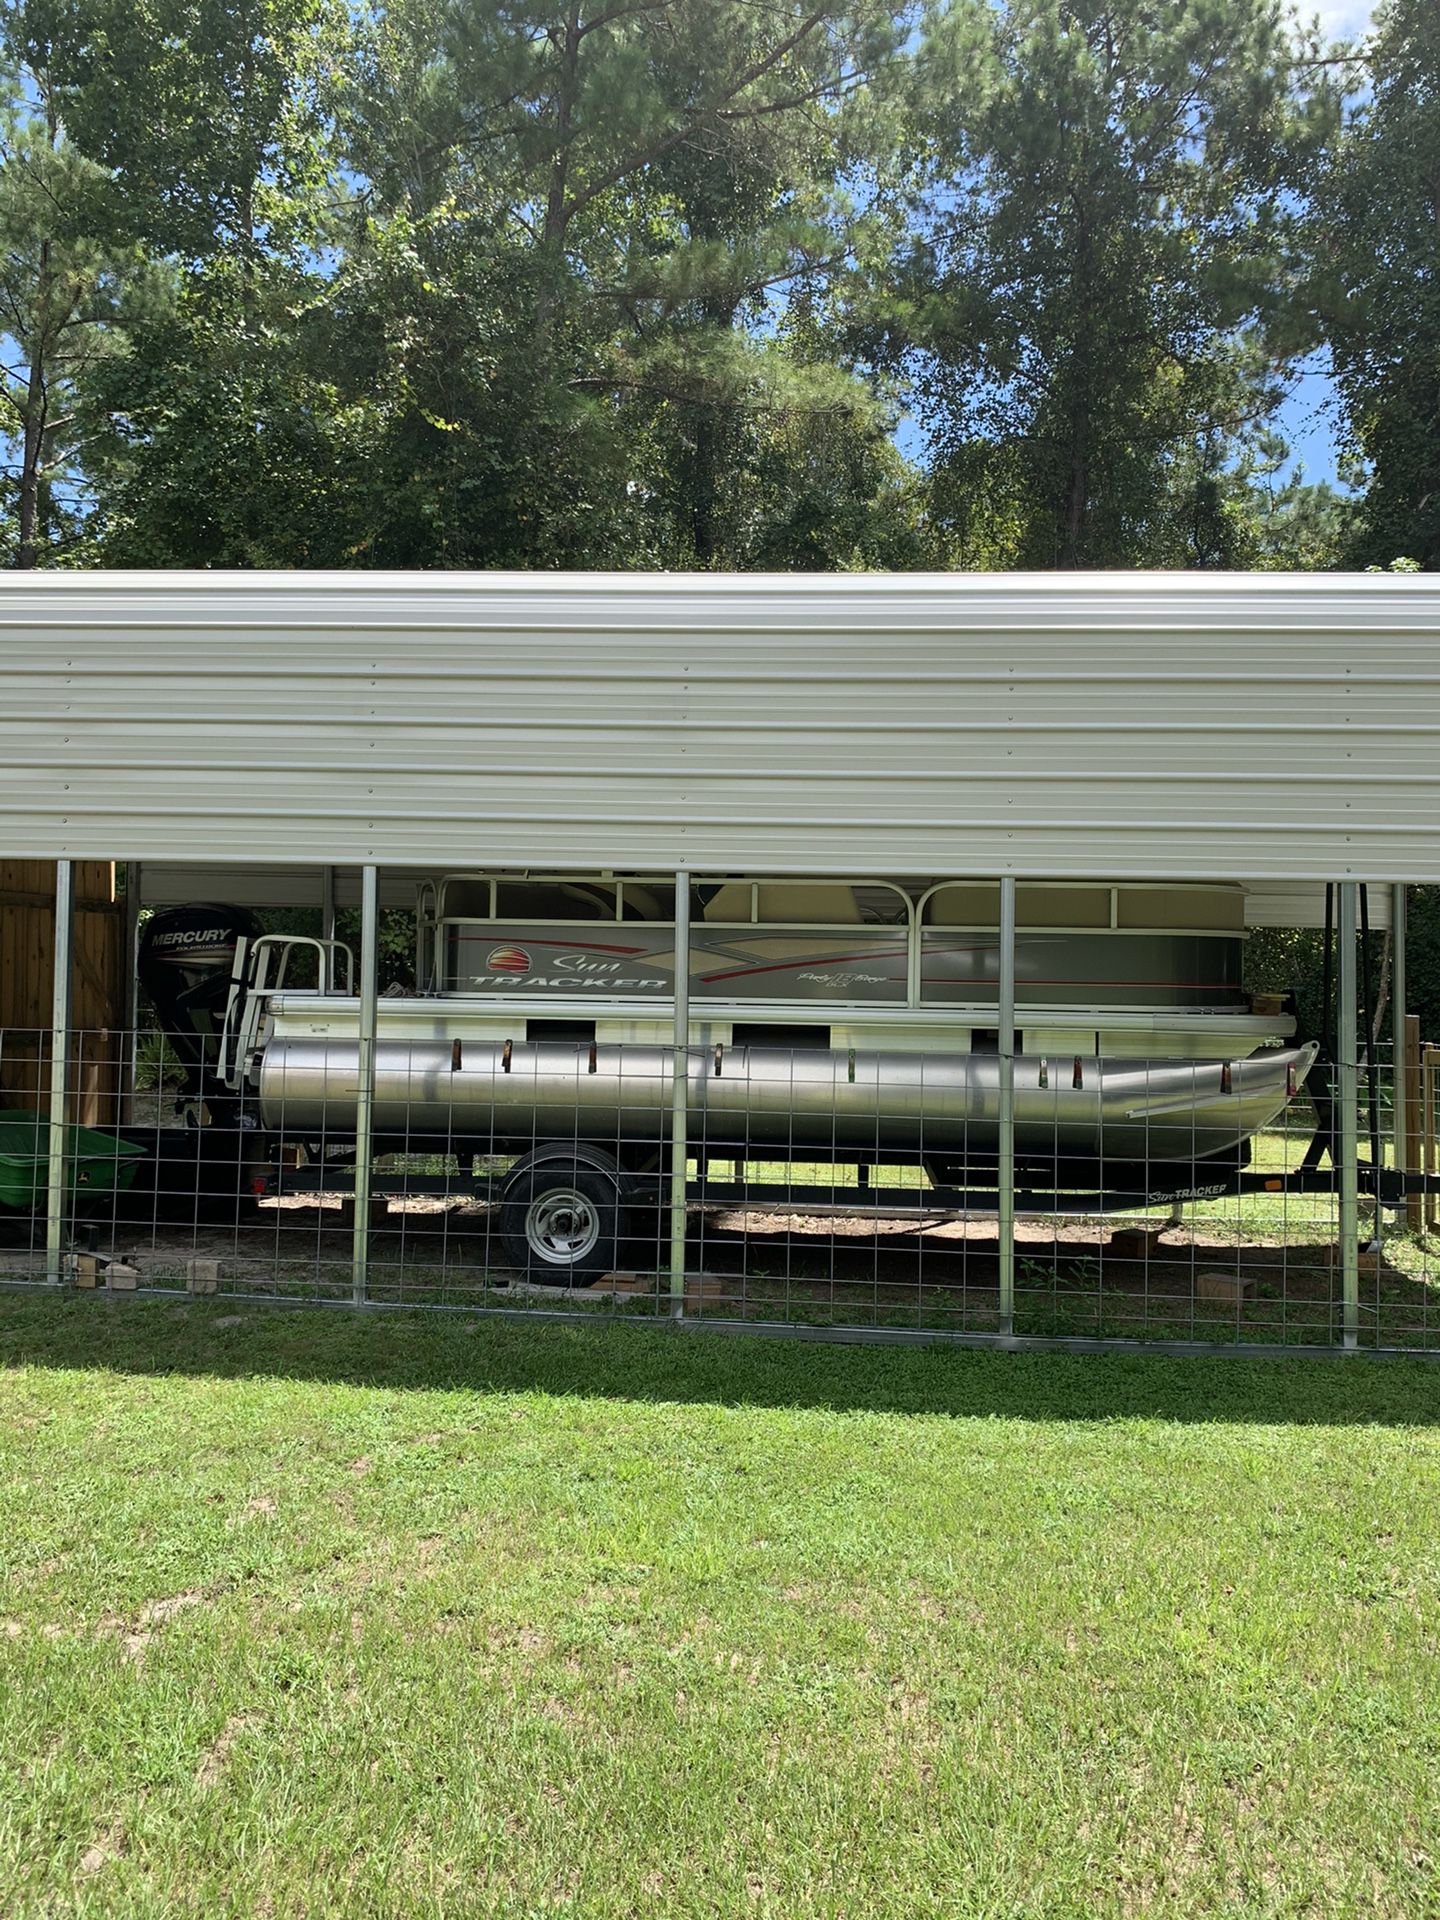 2019 18 ft SunTracker Party Barge Pontoon Boat/Extended 7 year motor warranty/Trailer/Spare tire/Cover included